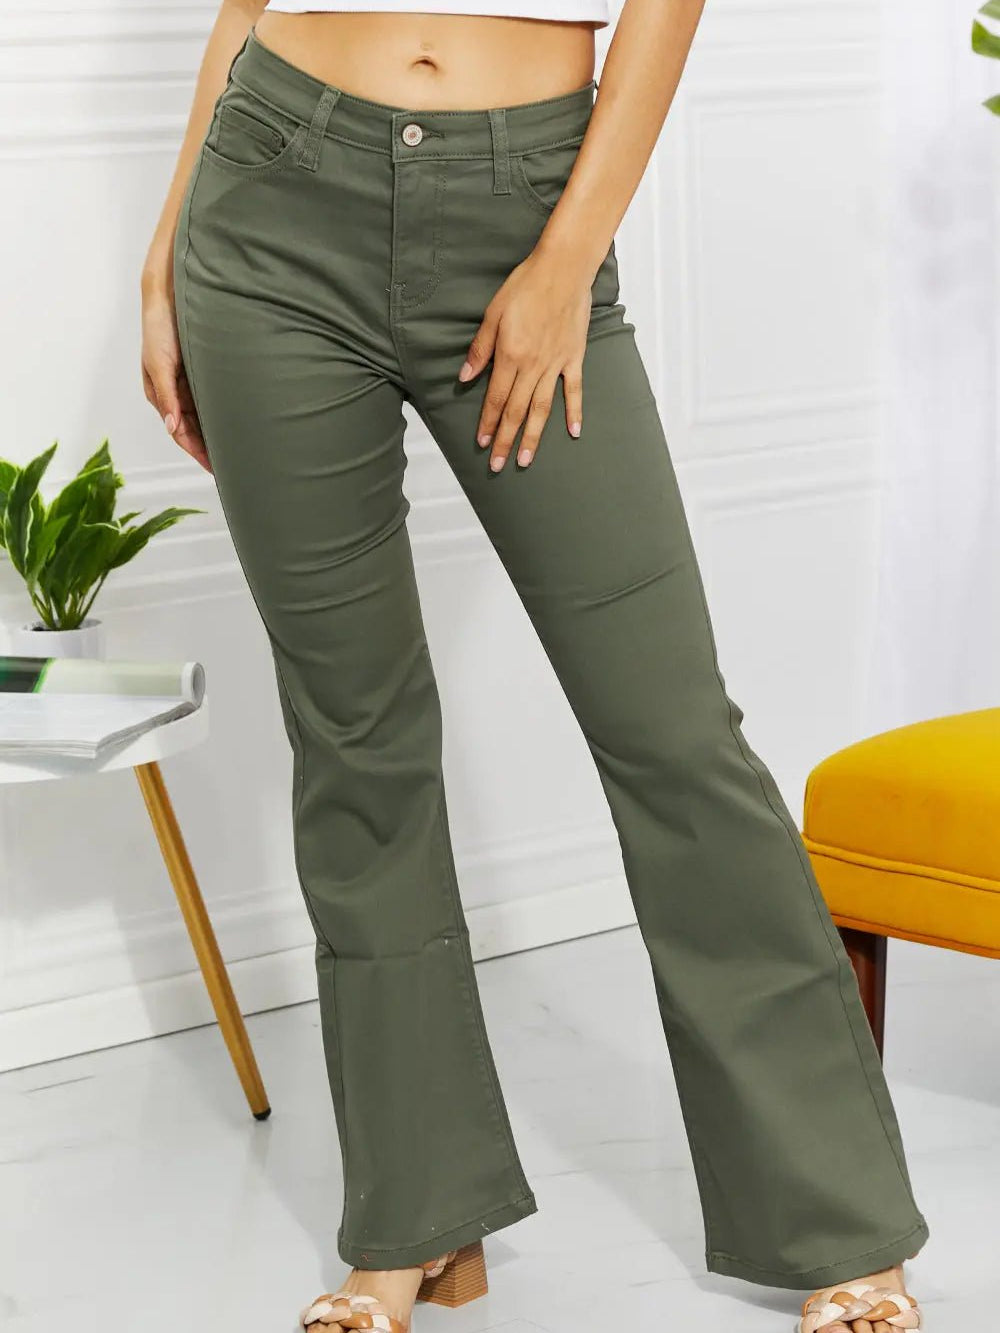 HIGH RISE BOOT CUT JEANS - OLIVE - MeadeuxHIGH RISE BOOT CUT JEANS - OLIVEBottomsMeadeux